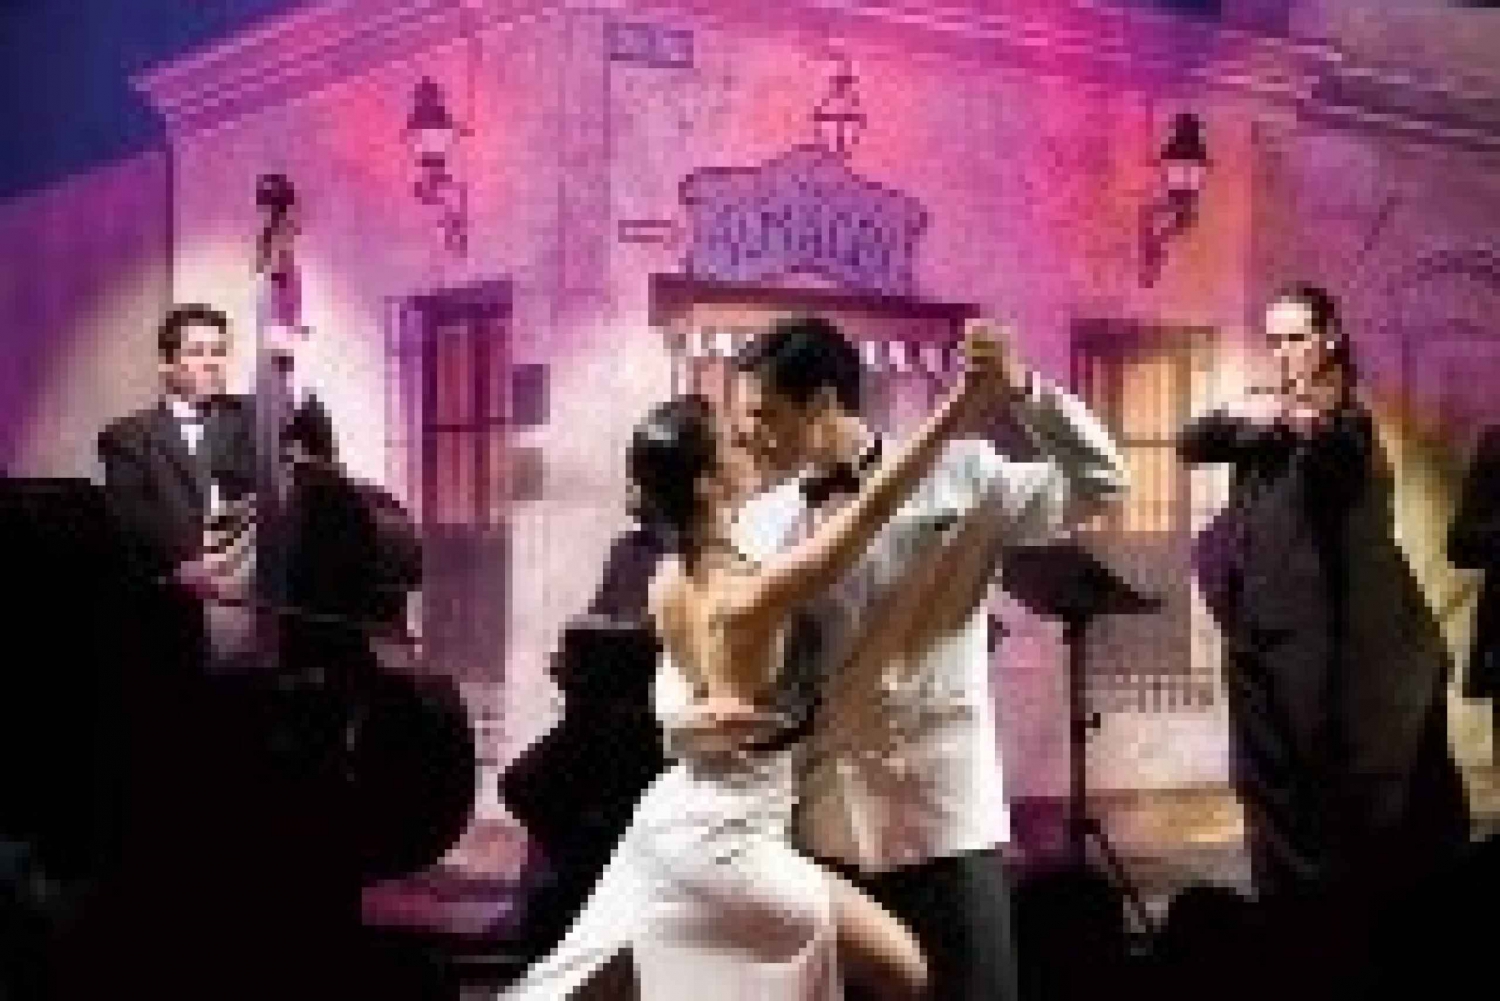 Tango Show at El Viejo Almacen (Only show without drinks)